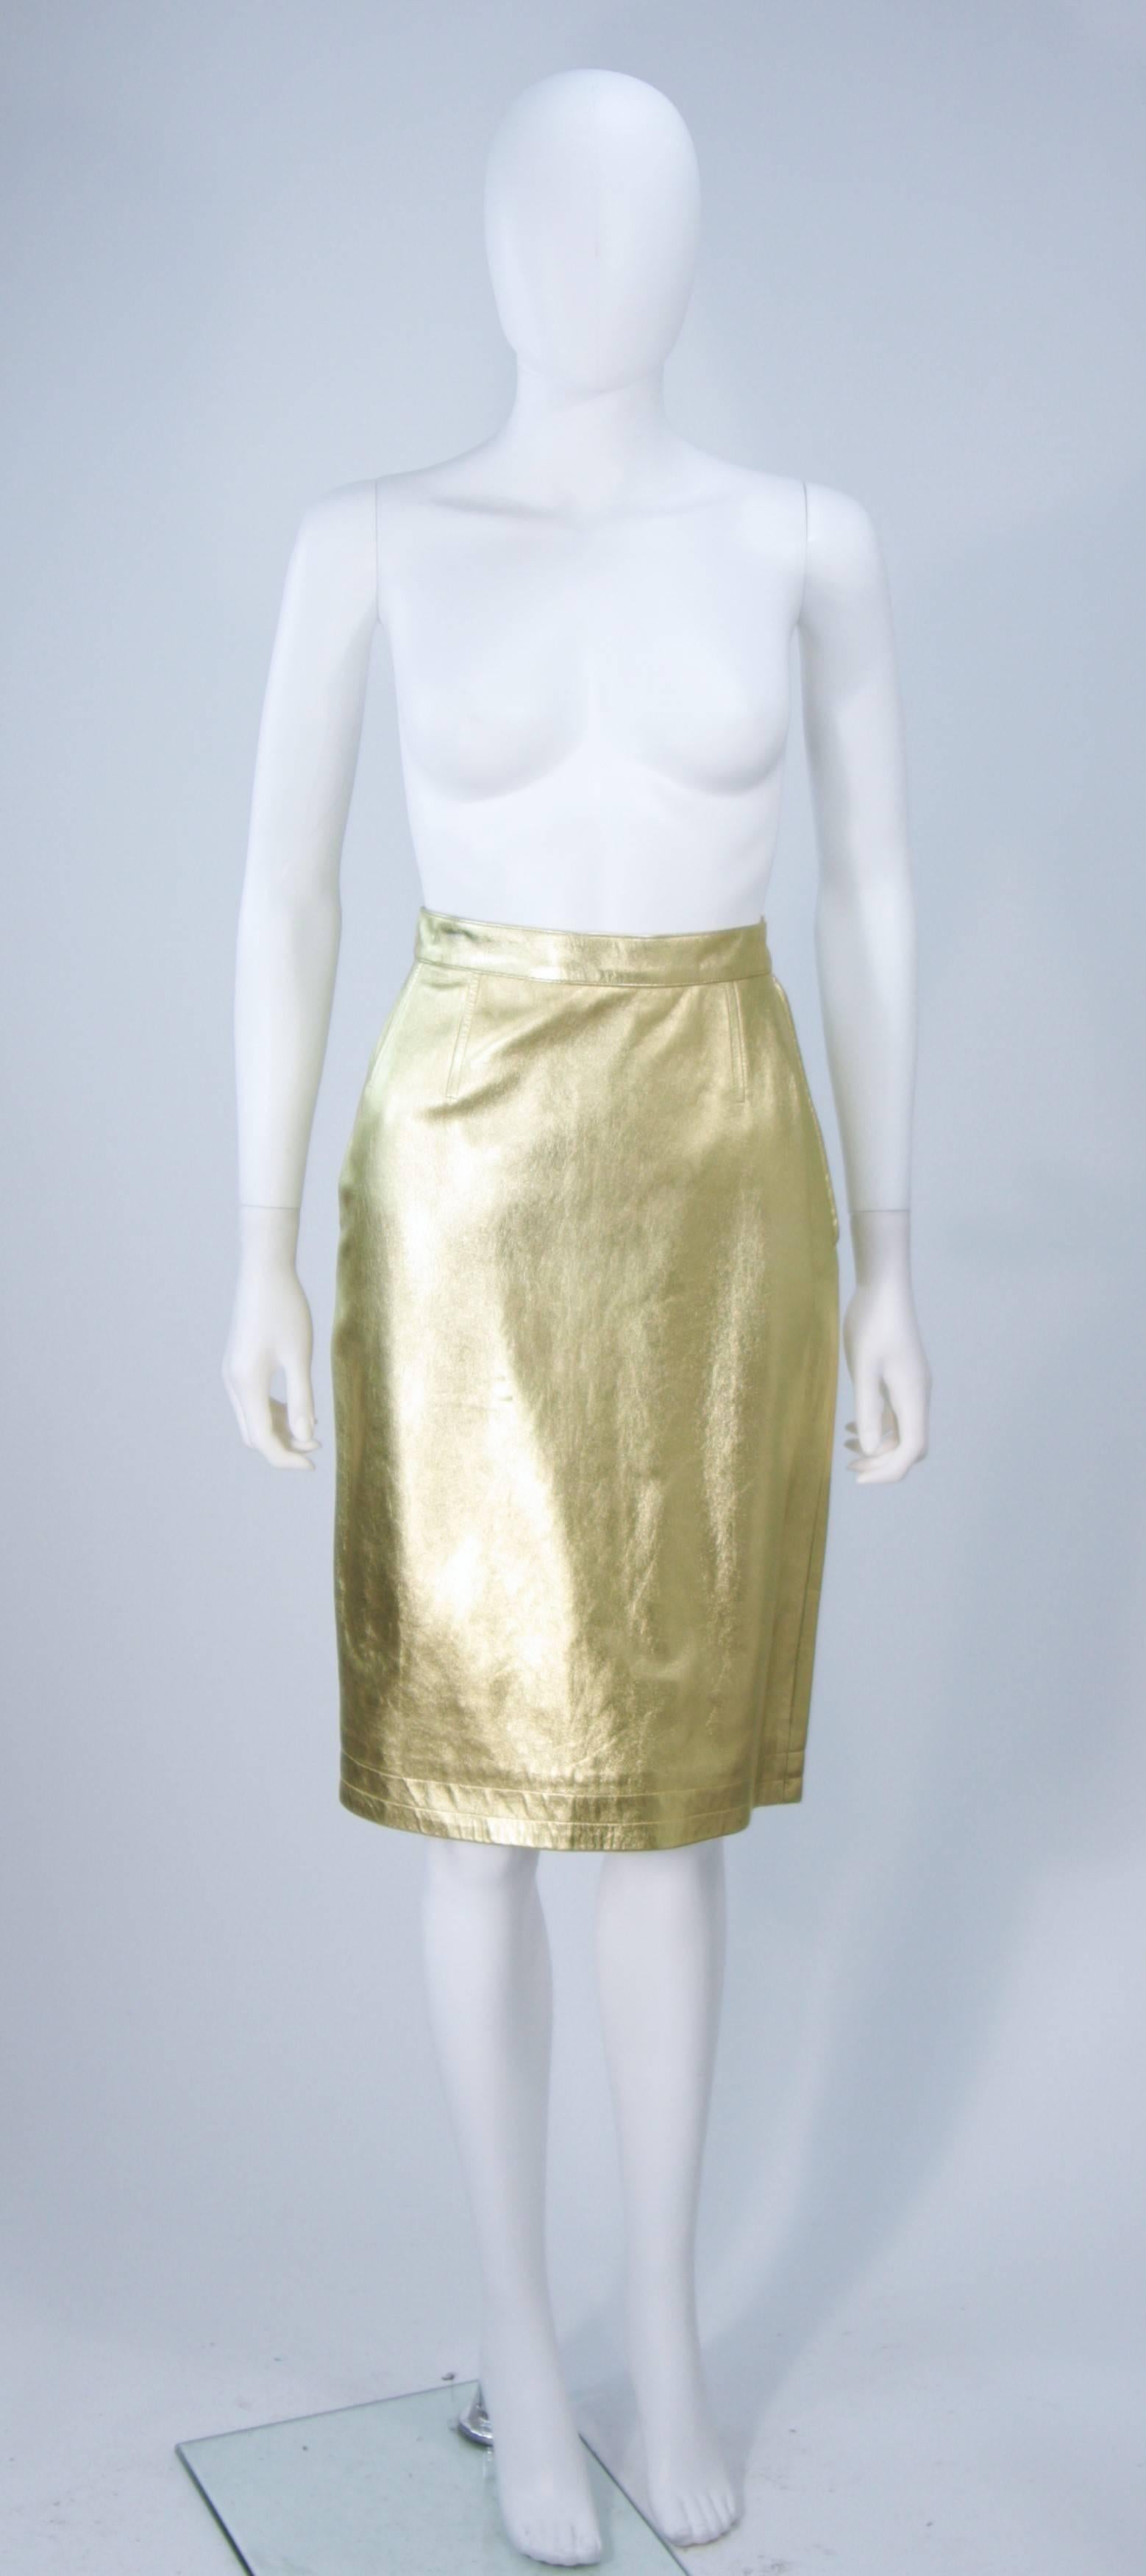  This Yves Saint Laurent skirt is composed of a gold metallic leather. Features a side zipper and top stitched darts. In excellent vintage condition.

This YSL gold leather skirt is from an extensive collection I acquired from the estate of a very